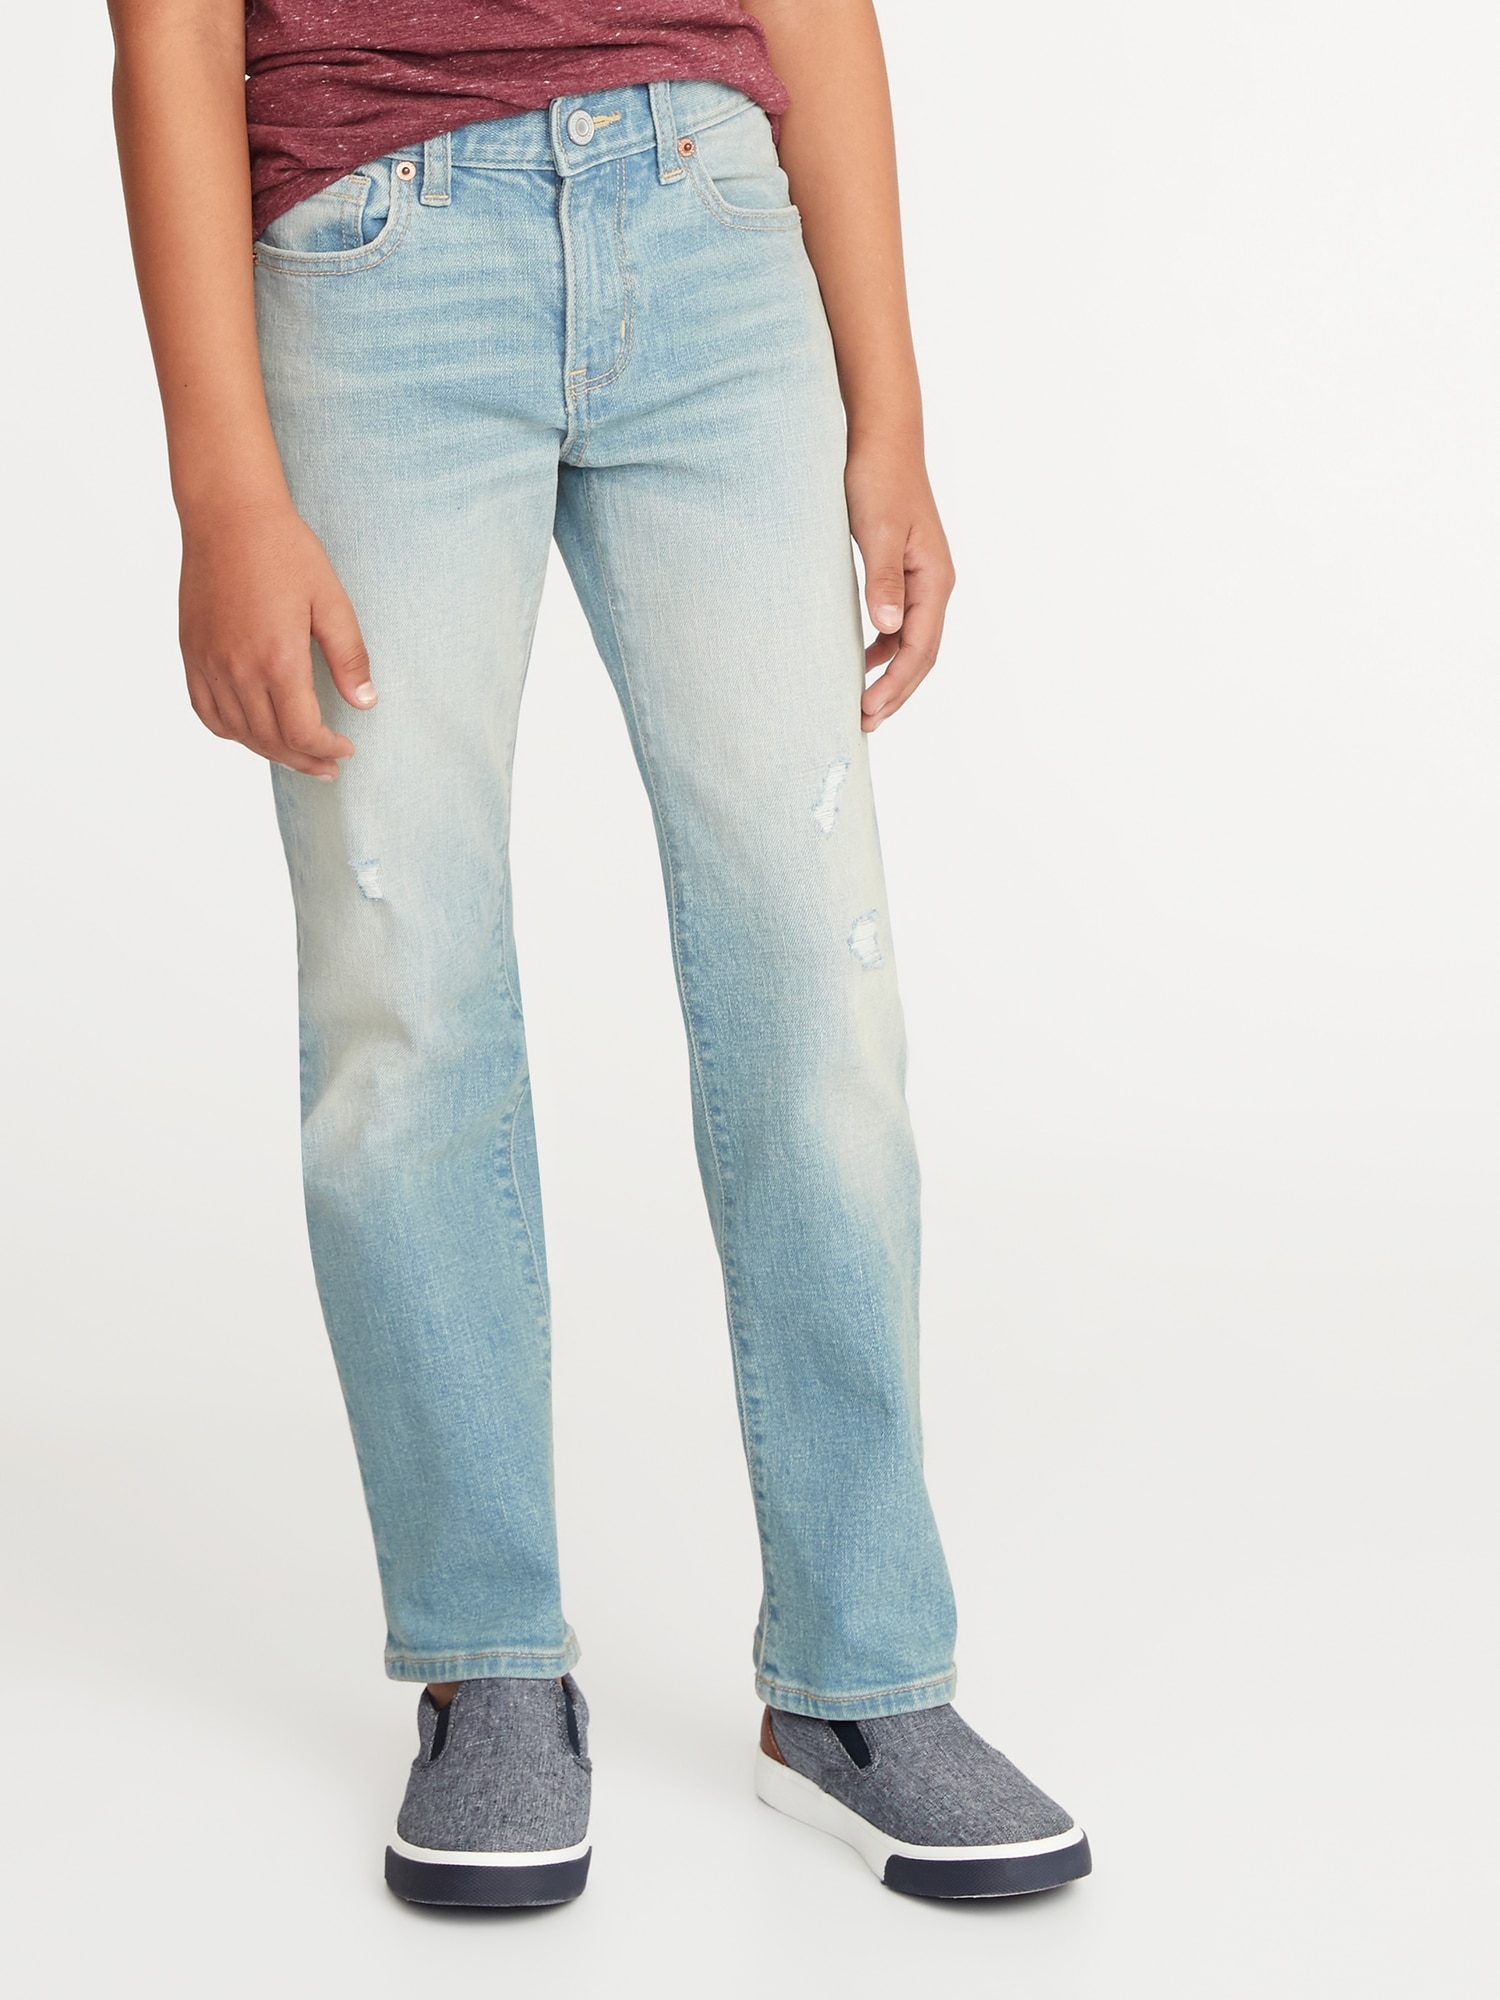 old navy jeans for boys